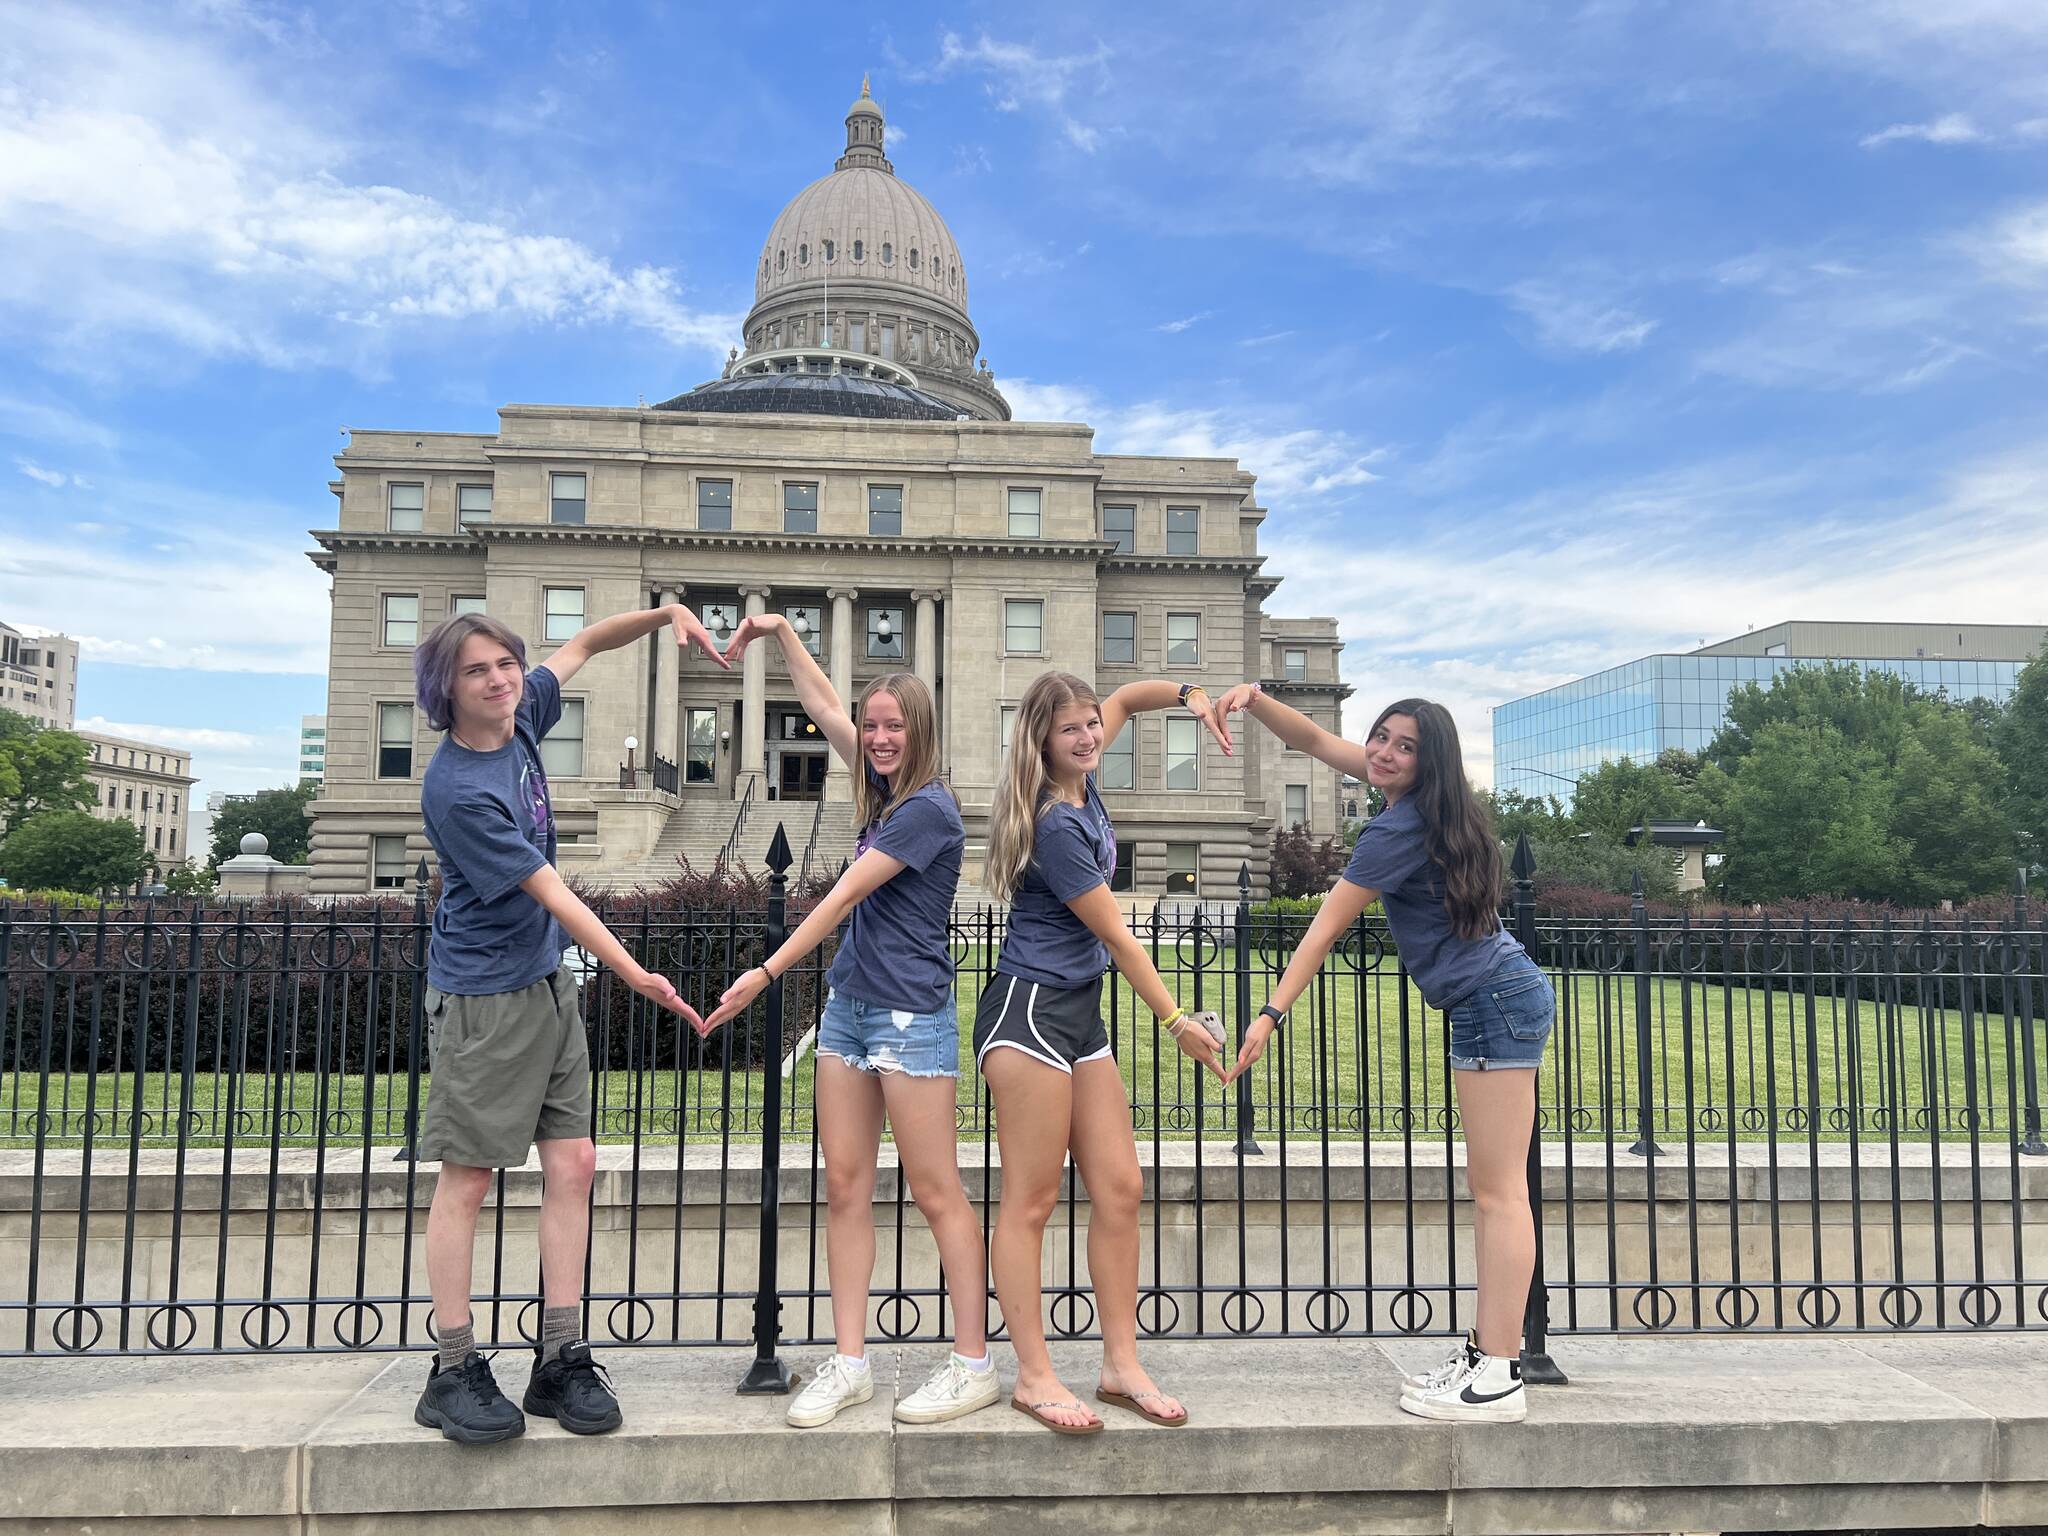 OPALCO/Contributed photo
The 2022 delegation at the Capital of Idaho included (from left to right) Satchel Bourne, McKenna Clark, August Moore and Valeria Villareal.